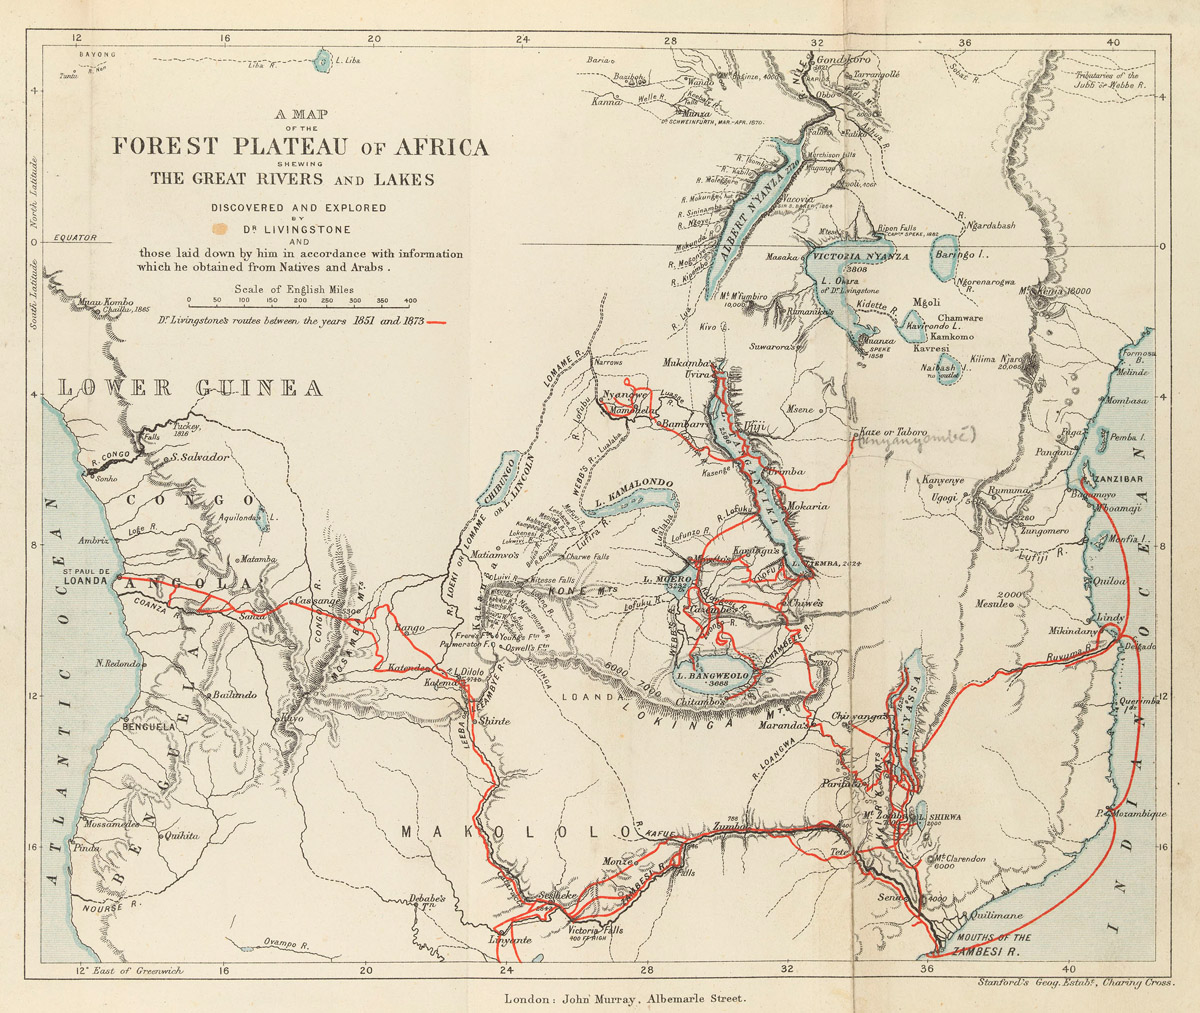 The small foldout map of Central Africa included with the published edition of Livingstone's Last Journals (1874). Copyright National Library of Scotland. Creative Commons Share-alike 2.5 UK: Scotland (https://creativecommons.org/licenses/by-nc-sa/2.5/scotland/).